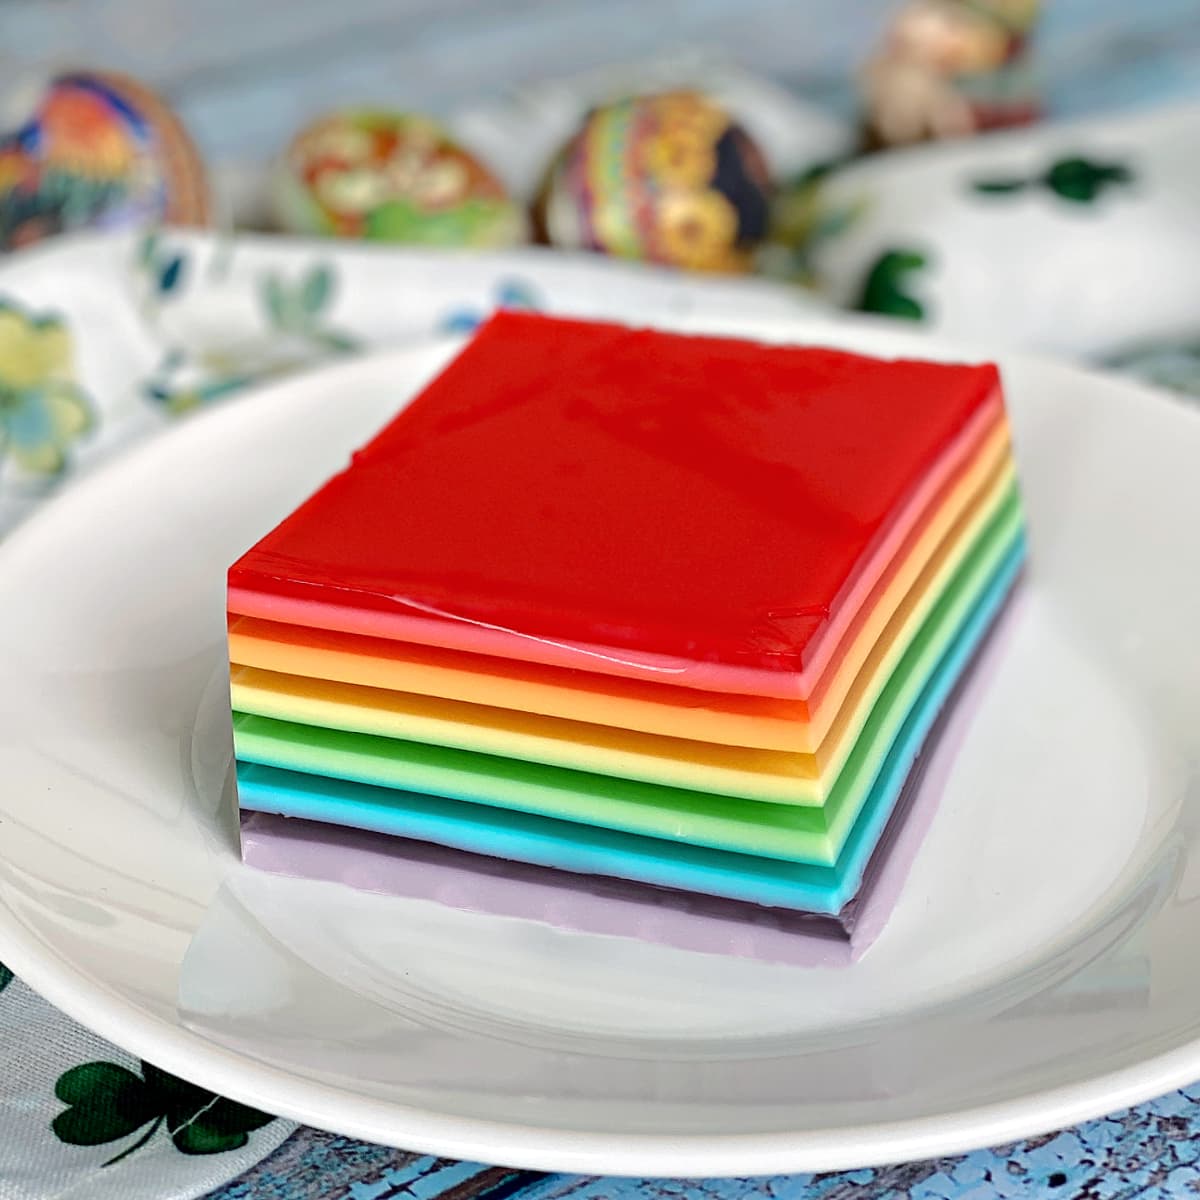 Single serving of rainbow jello on a small plate.